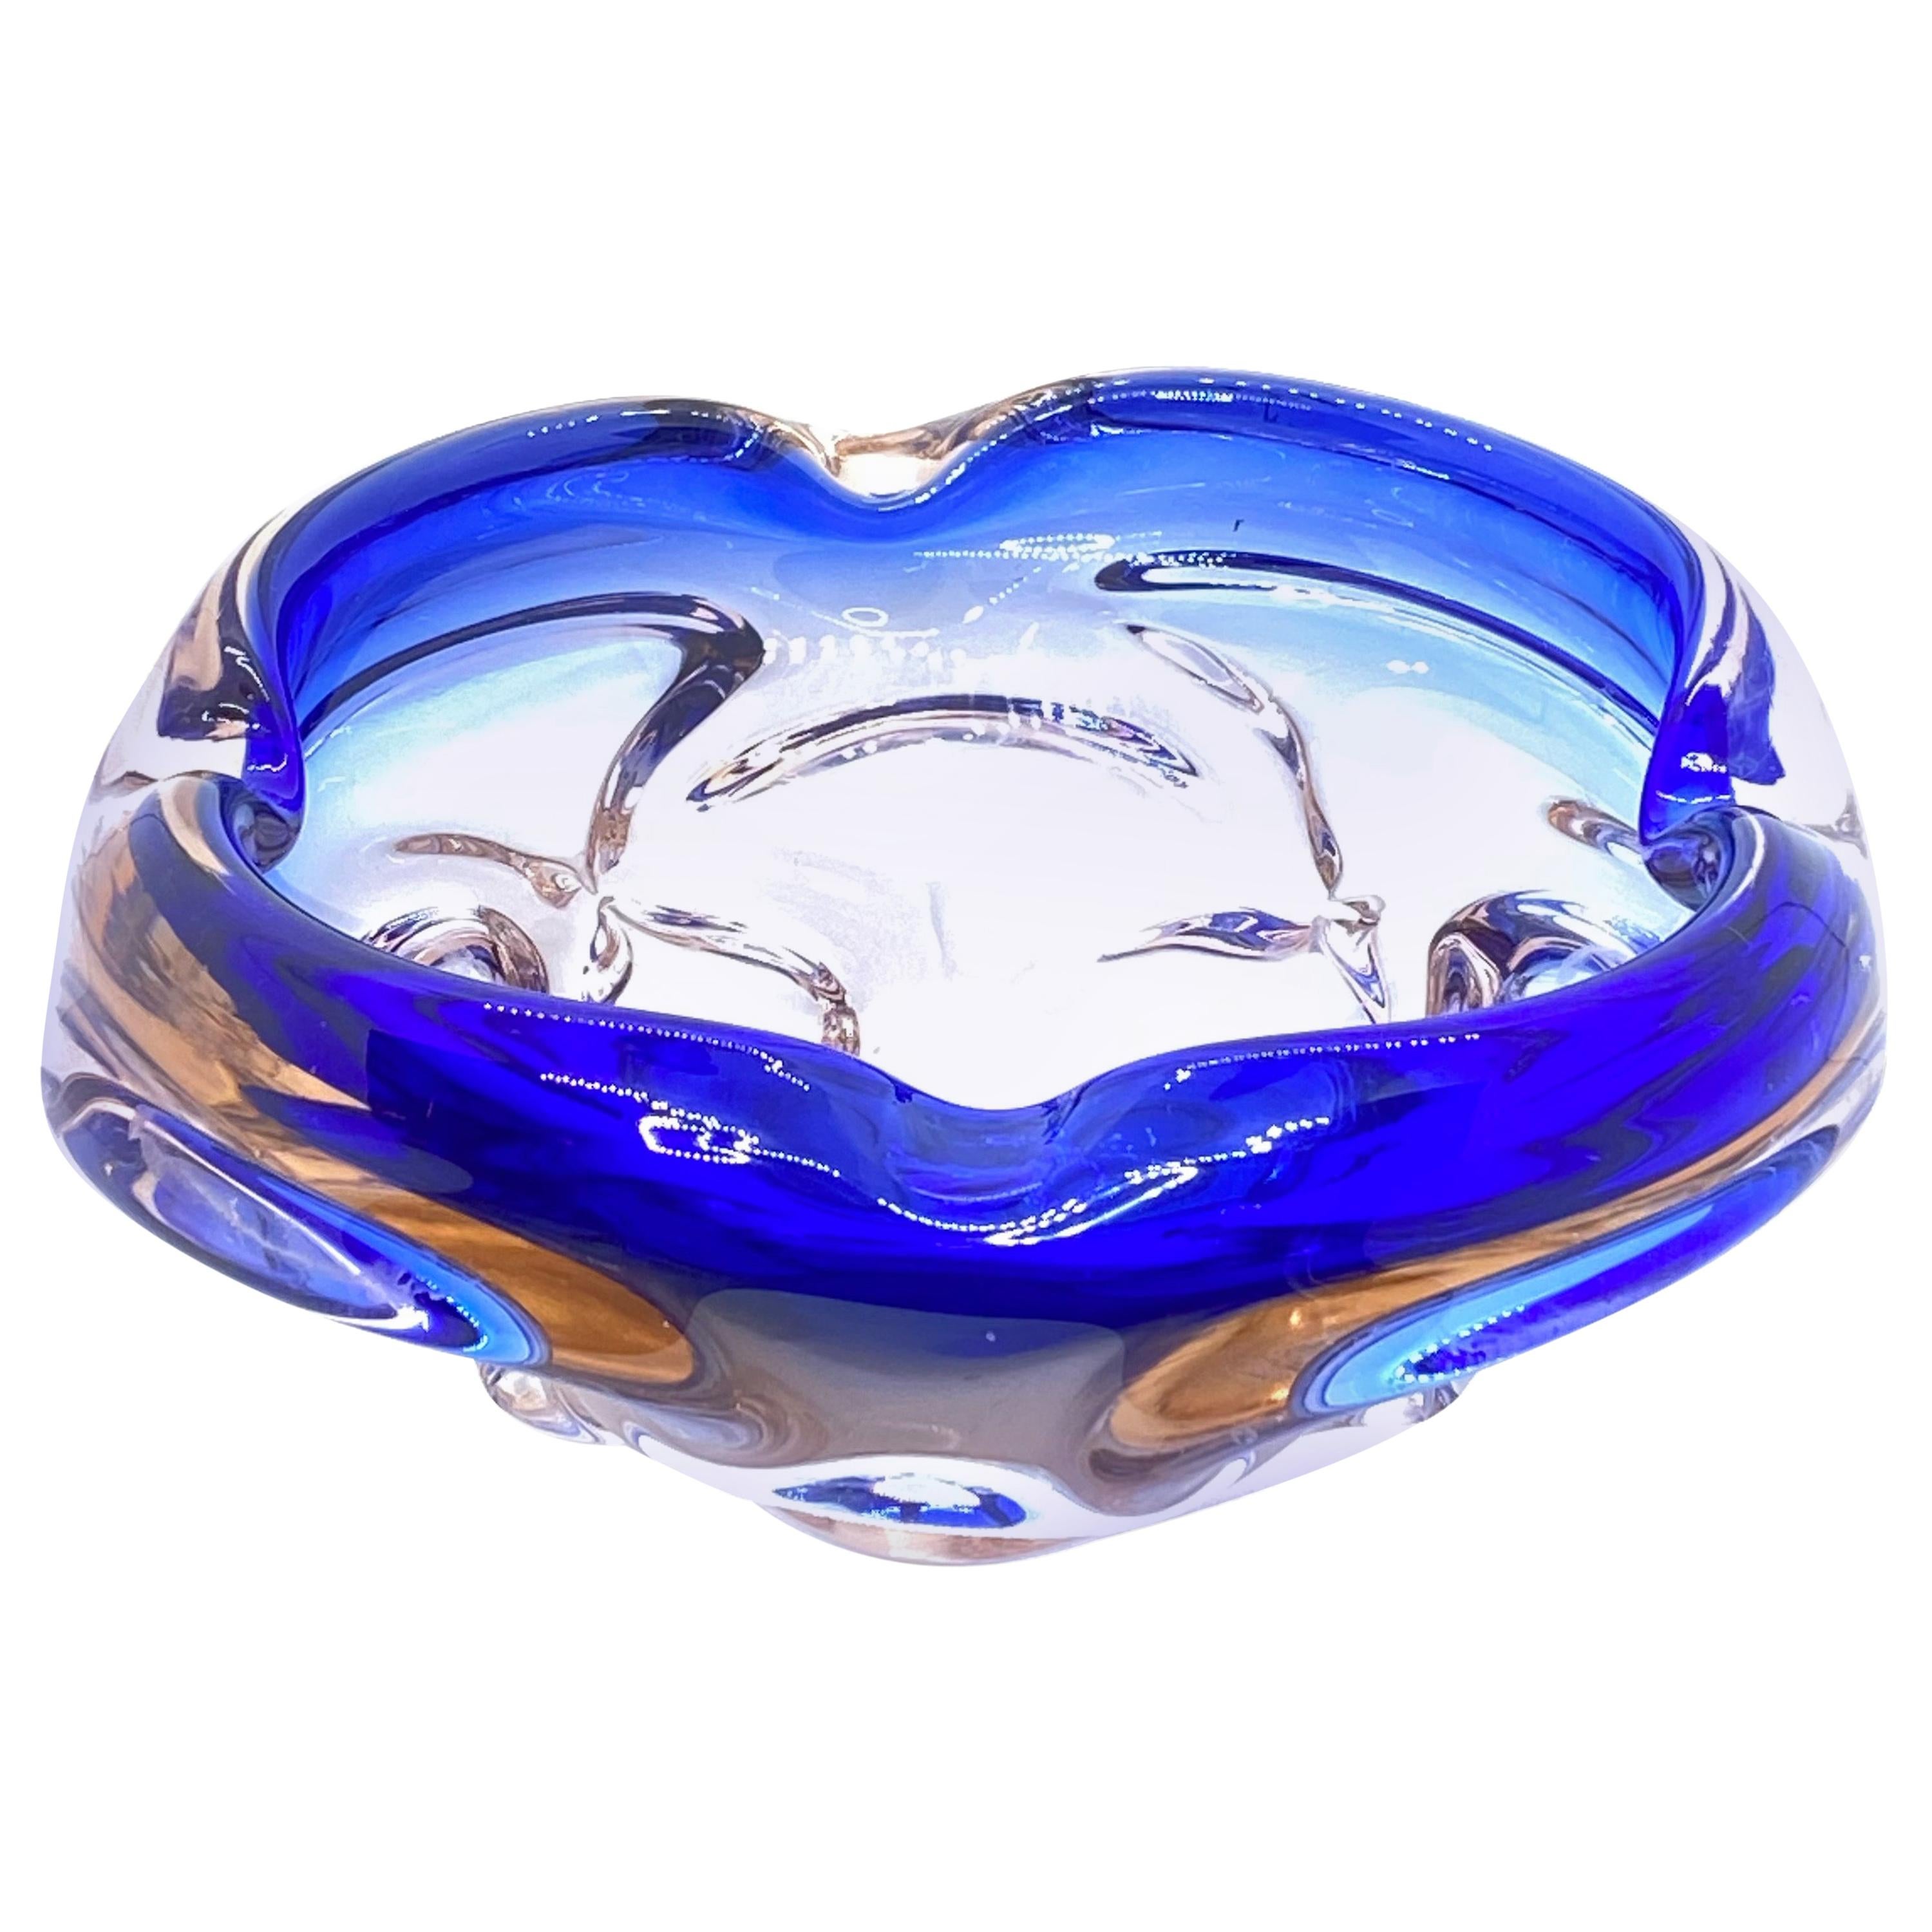 Murano Art Glass Bowl Catchall roségold and blue, Vintage, Italy, 1970s